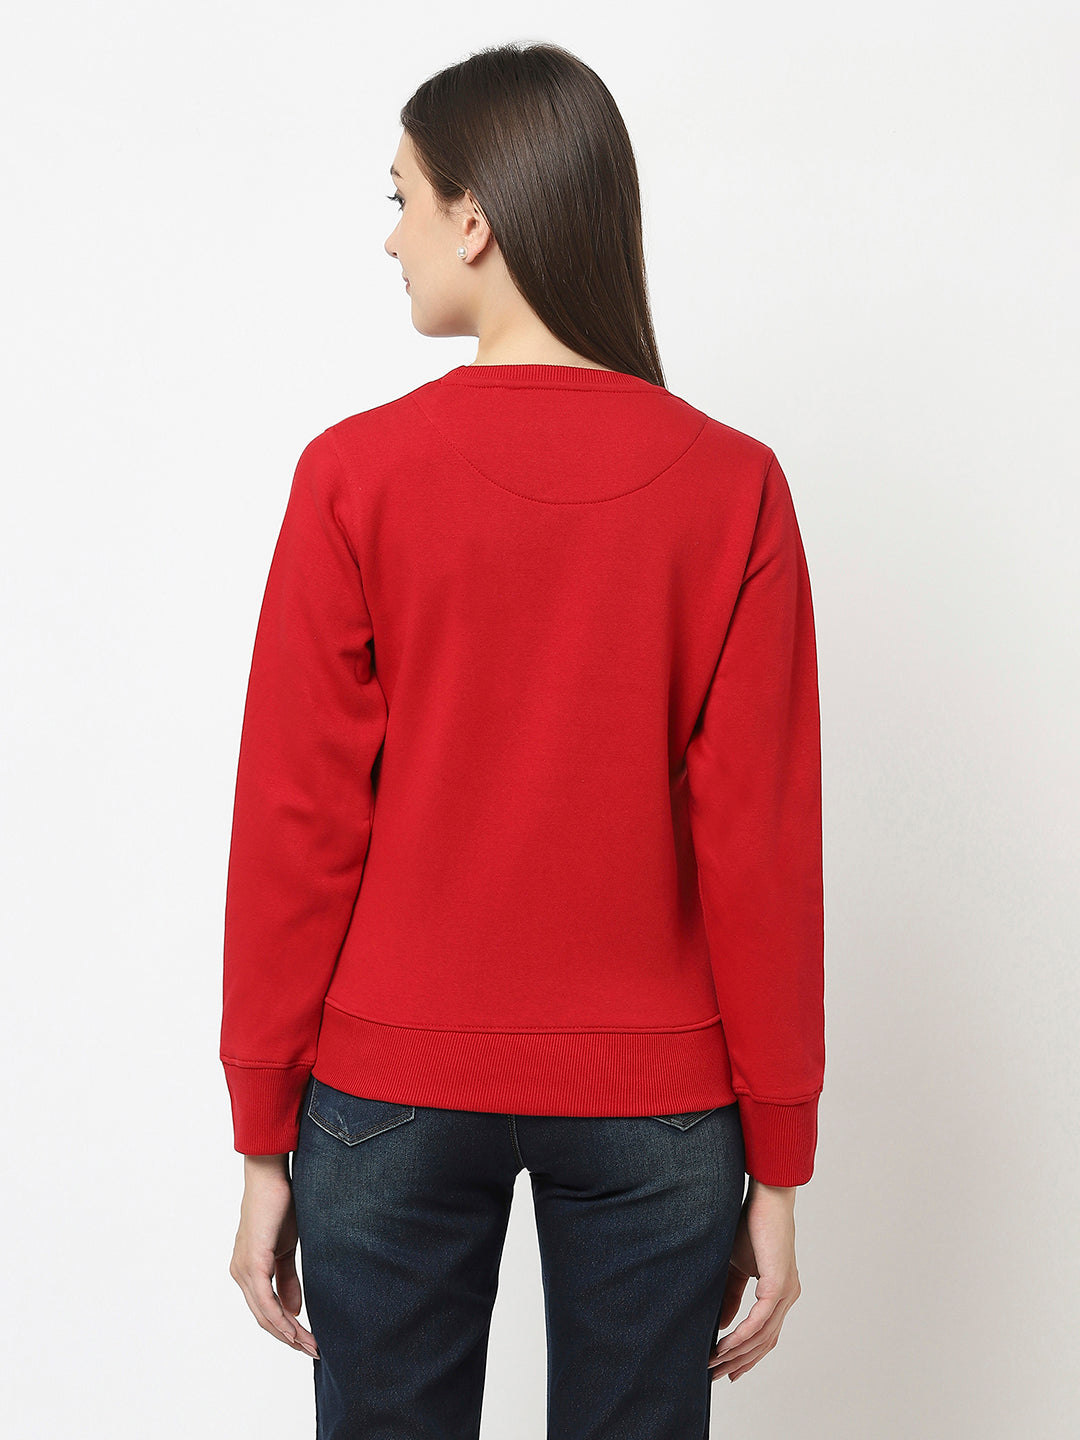 Red Pull-Over Style Sweatshirt with Graphic Print 